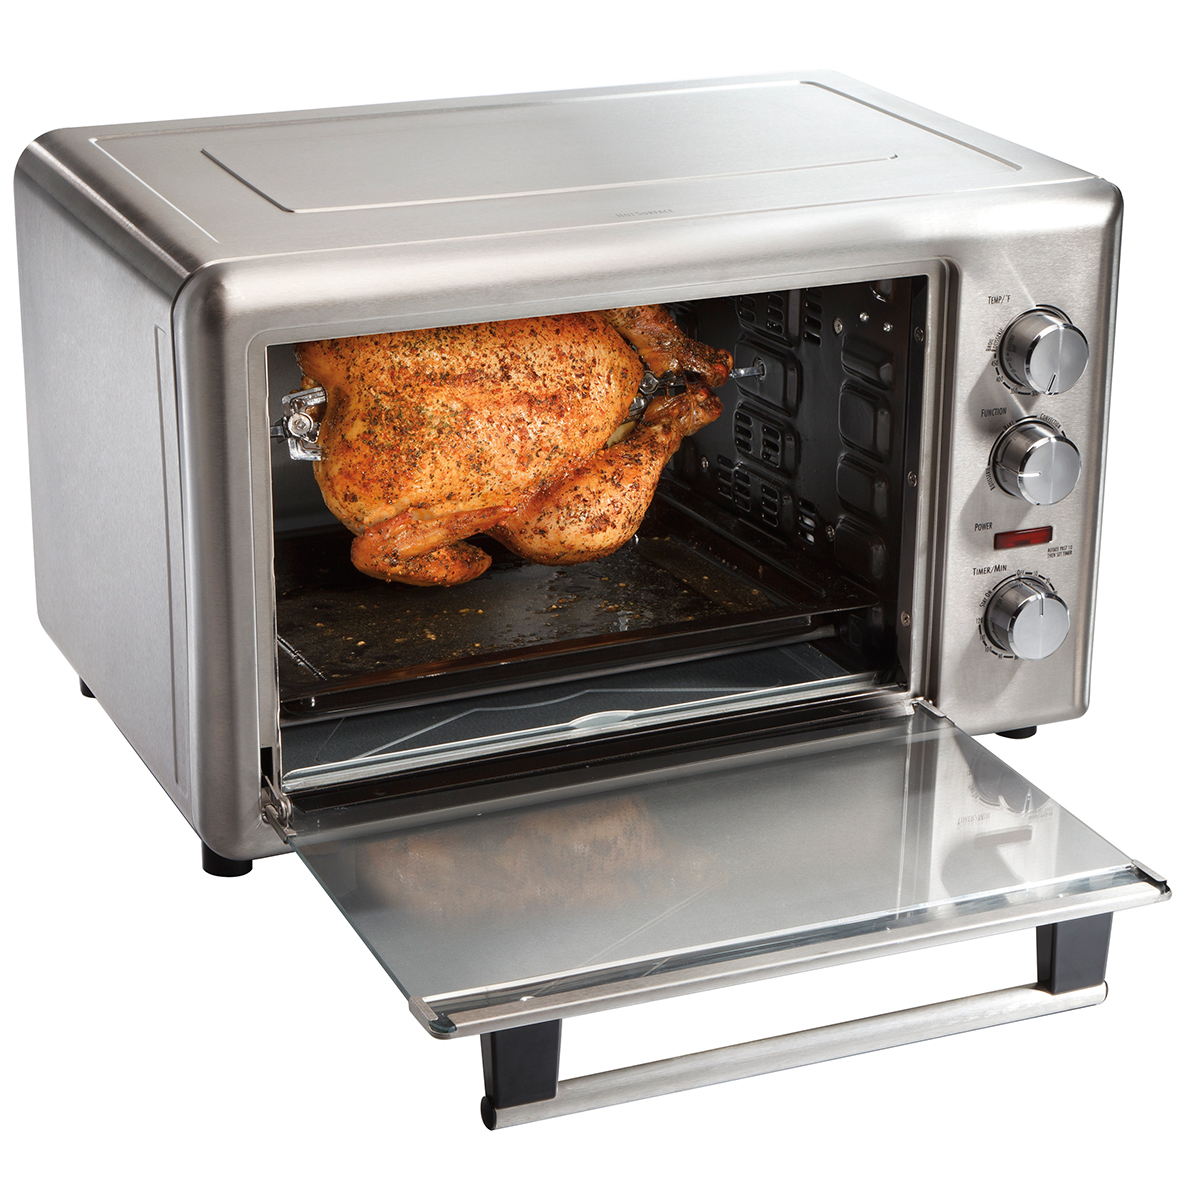 Hamilton Beach Countertop Convection Toaster Oven and Rotisserie Stainless Steel